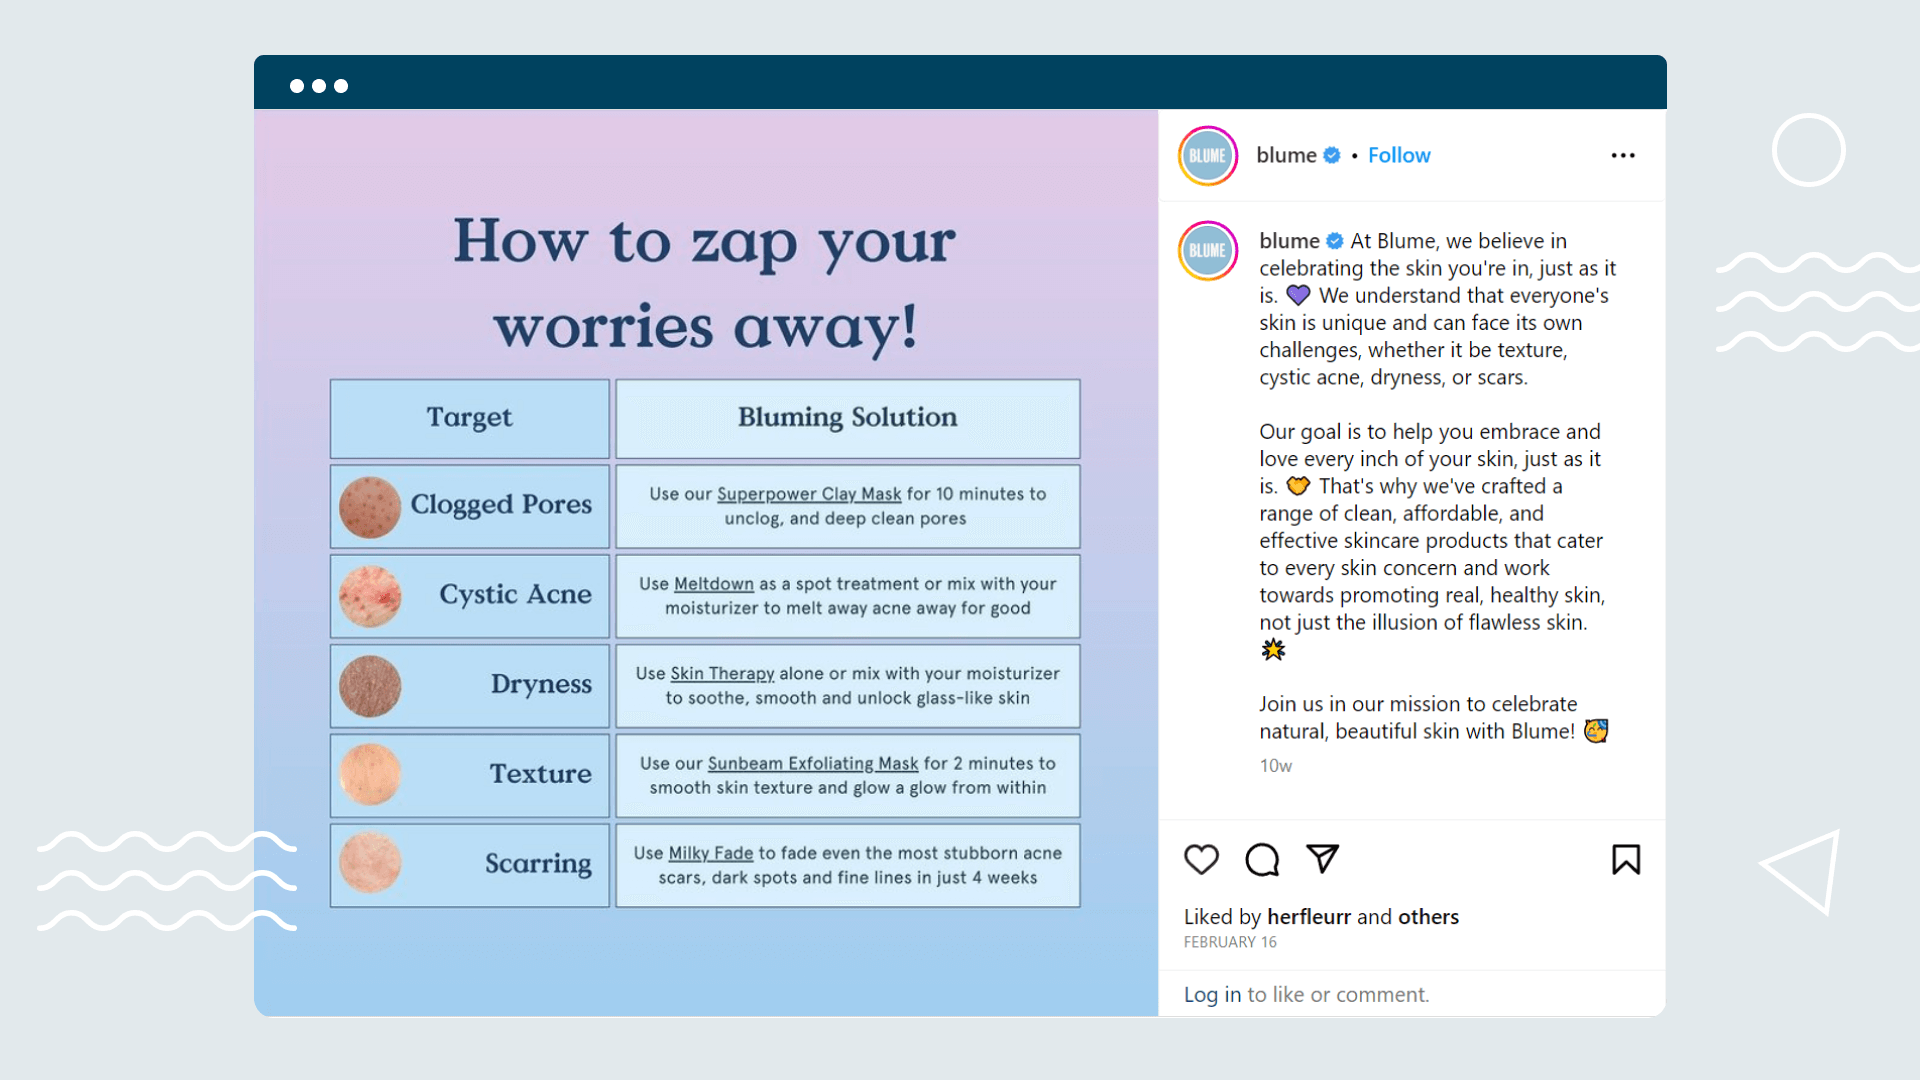 Image showing example of an educational Instagram caption